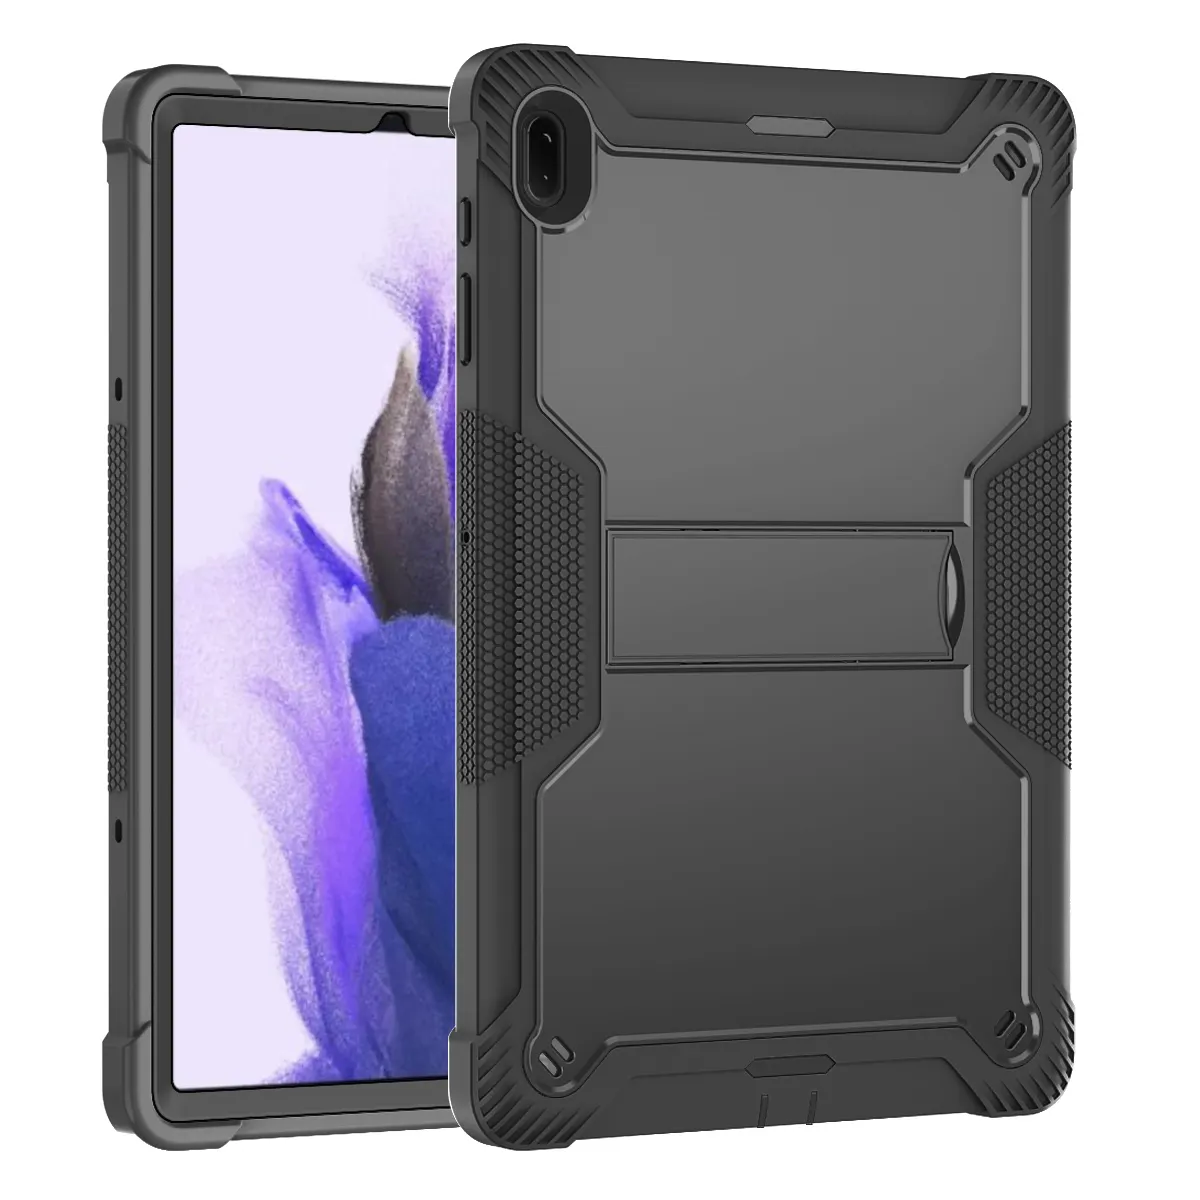 Kickstand Tablet Case For Samsung Galaxy Tab S7 FE 12.4 inch T730 T735/S7 Plus T970 T975 /S8 Plus X800 Shockproof Armor Cover